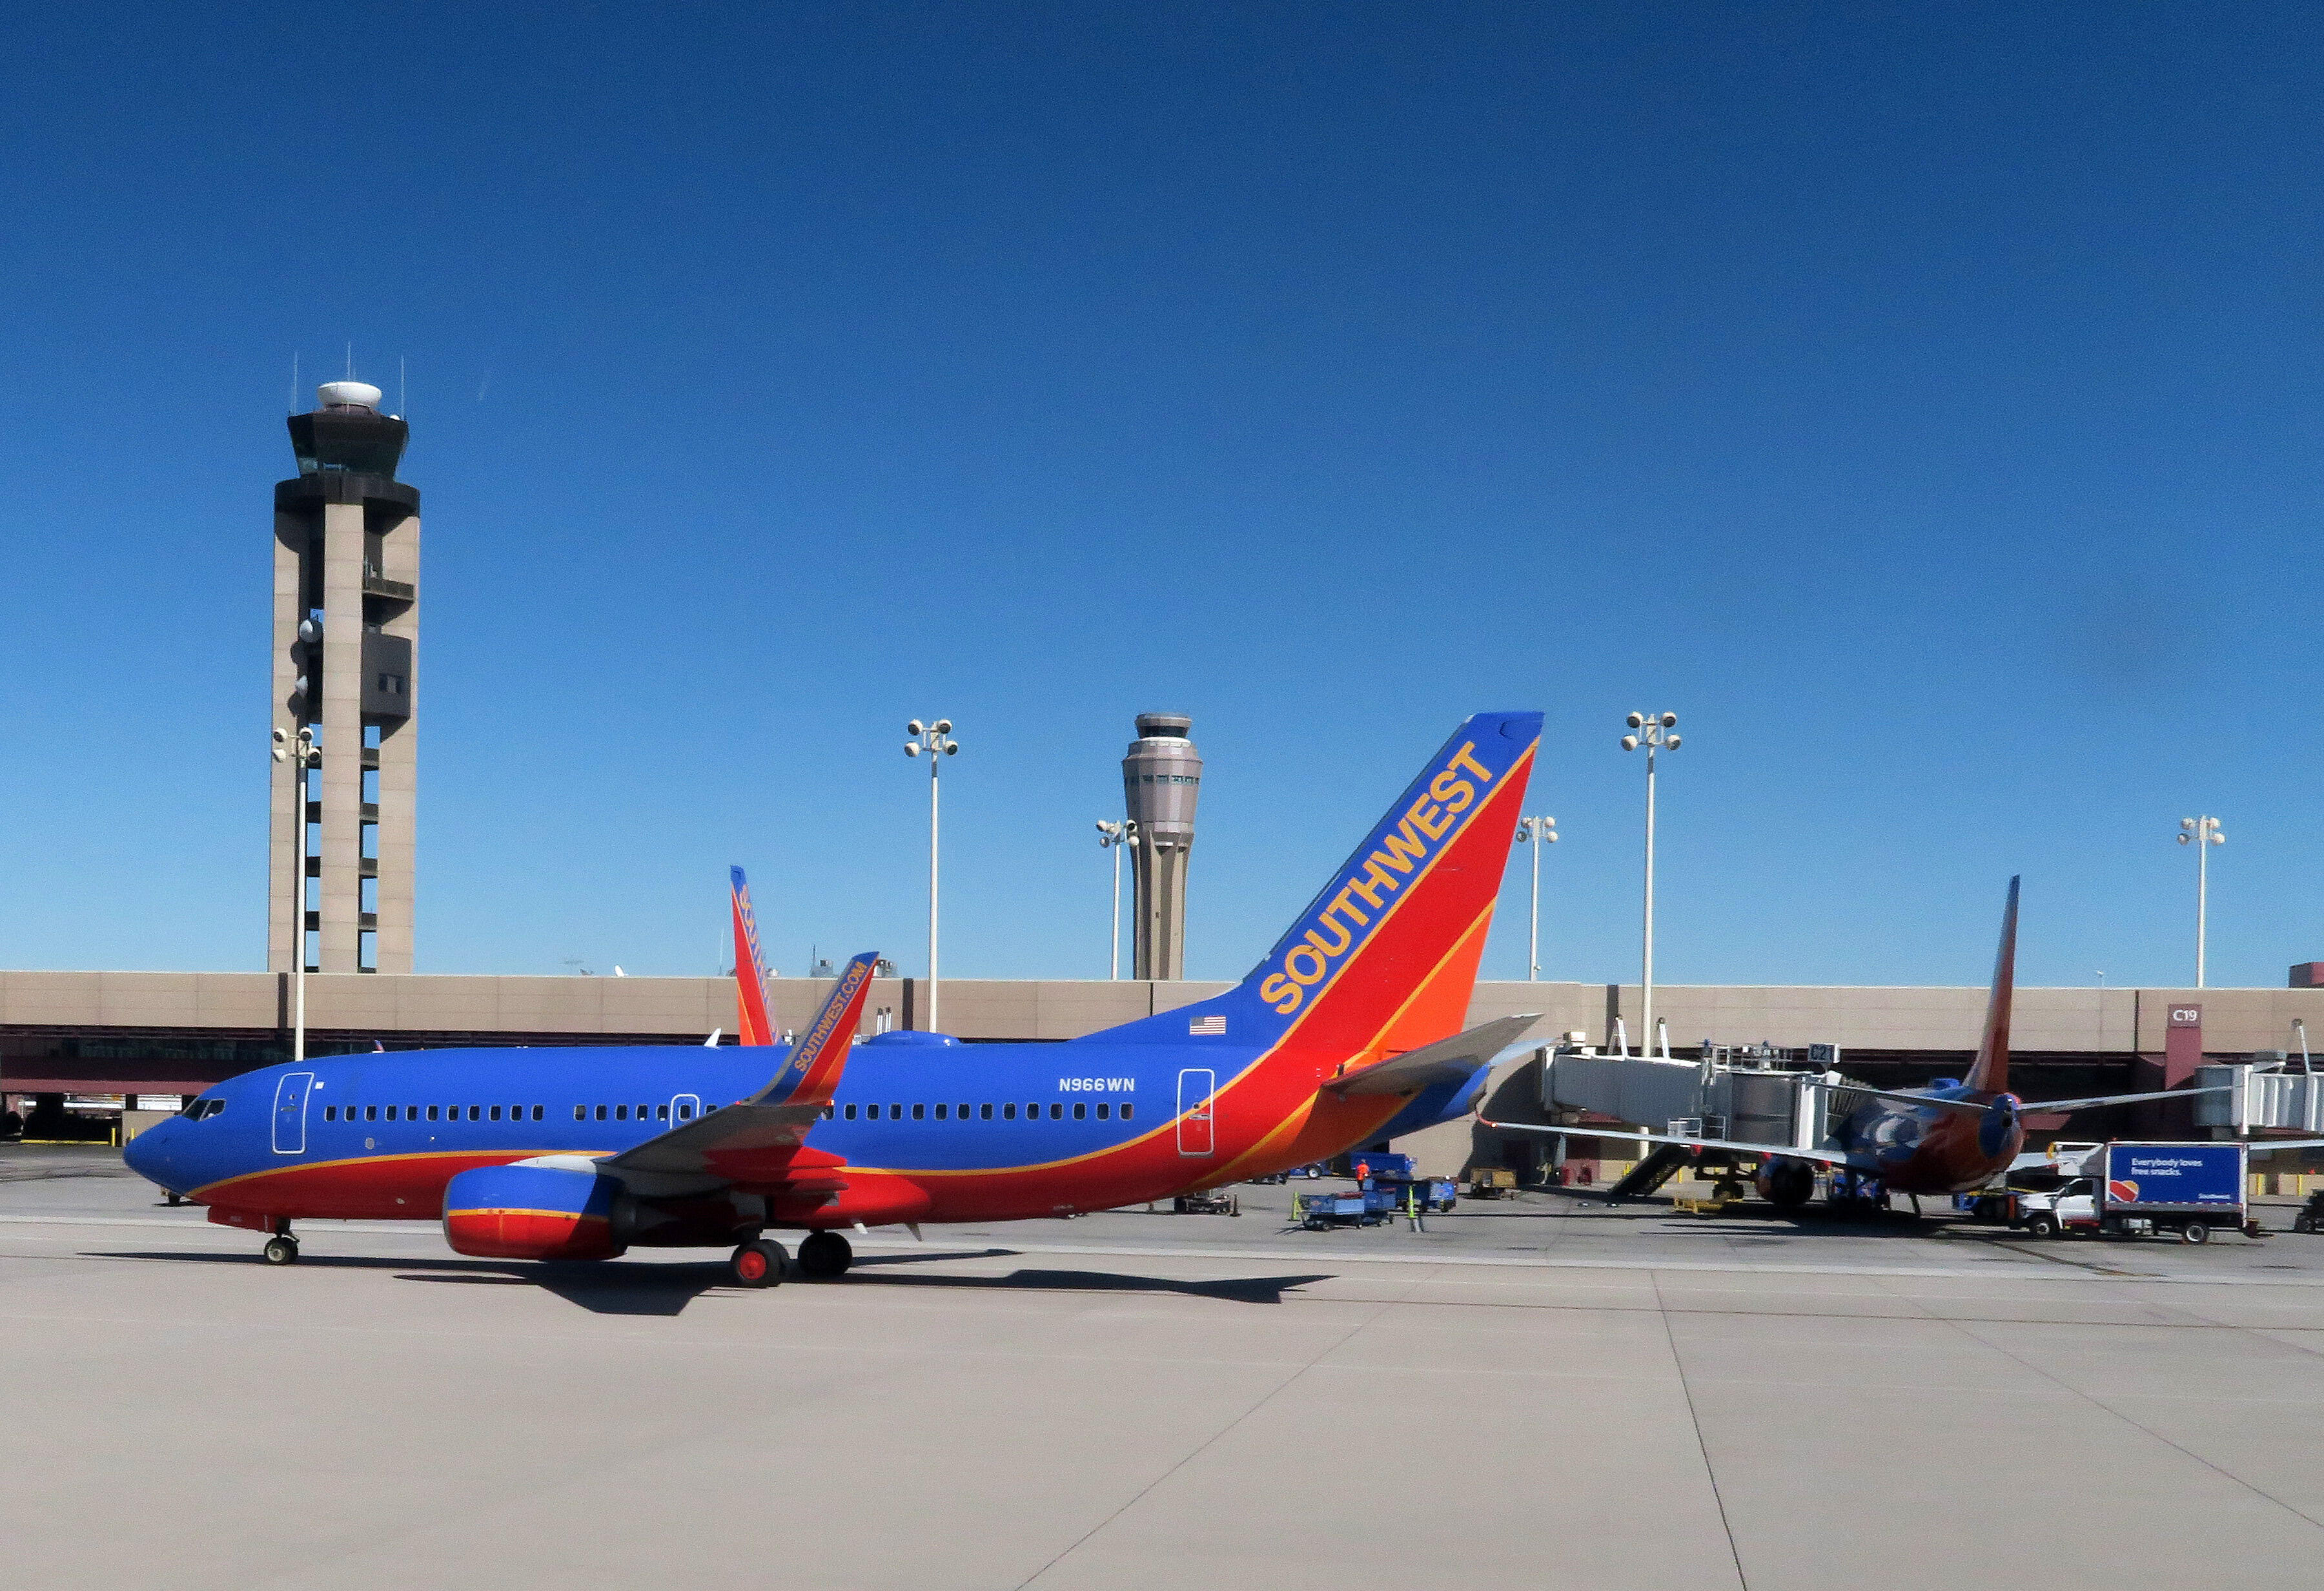 A Southwest Airlines plane is seen at the gate on the tarmac of McCarran International Airport in Las Vegas, Nevada on February 15, 2017. / AFP PHOTO / RHONA WISE        (Photo credit should read RHONA WISE/AFP/Getty Images)